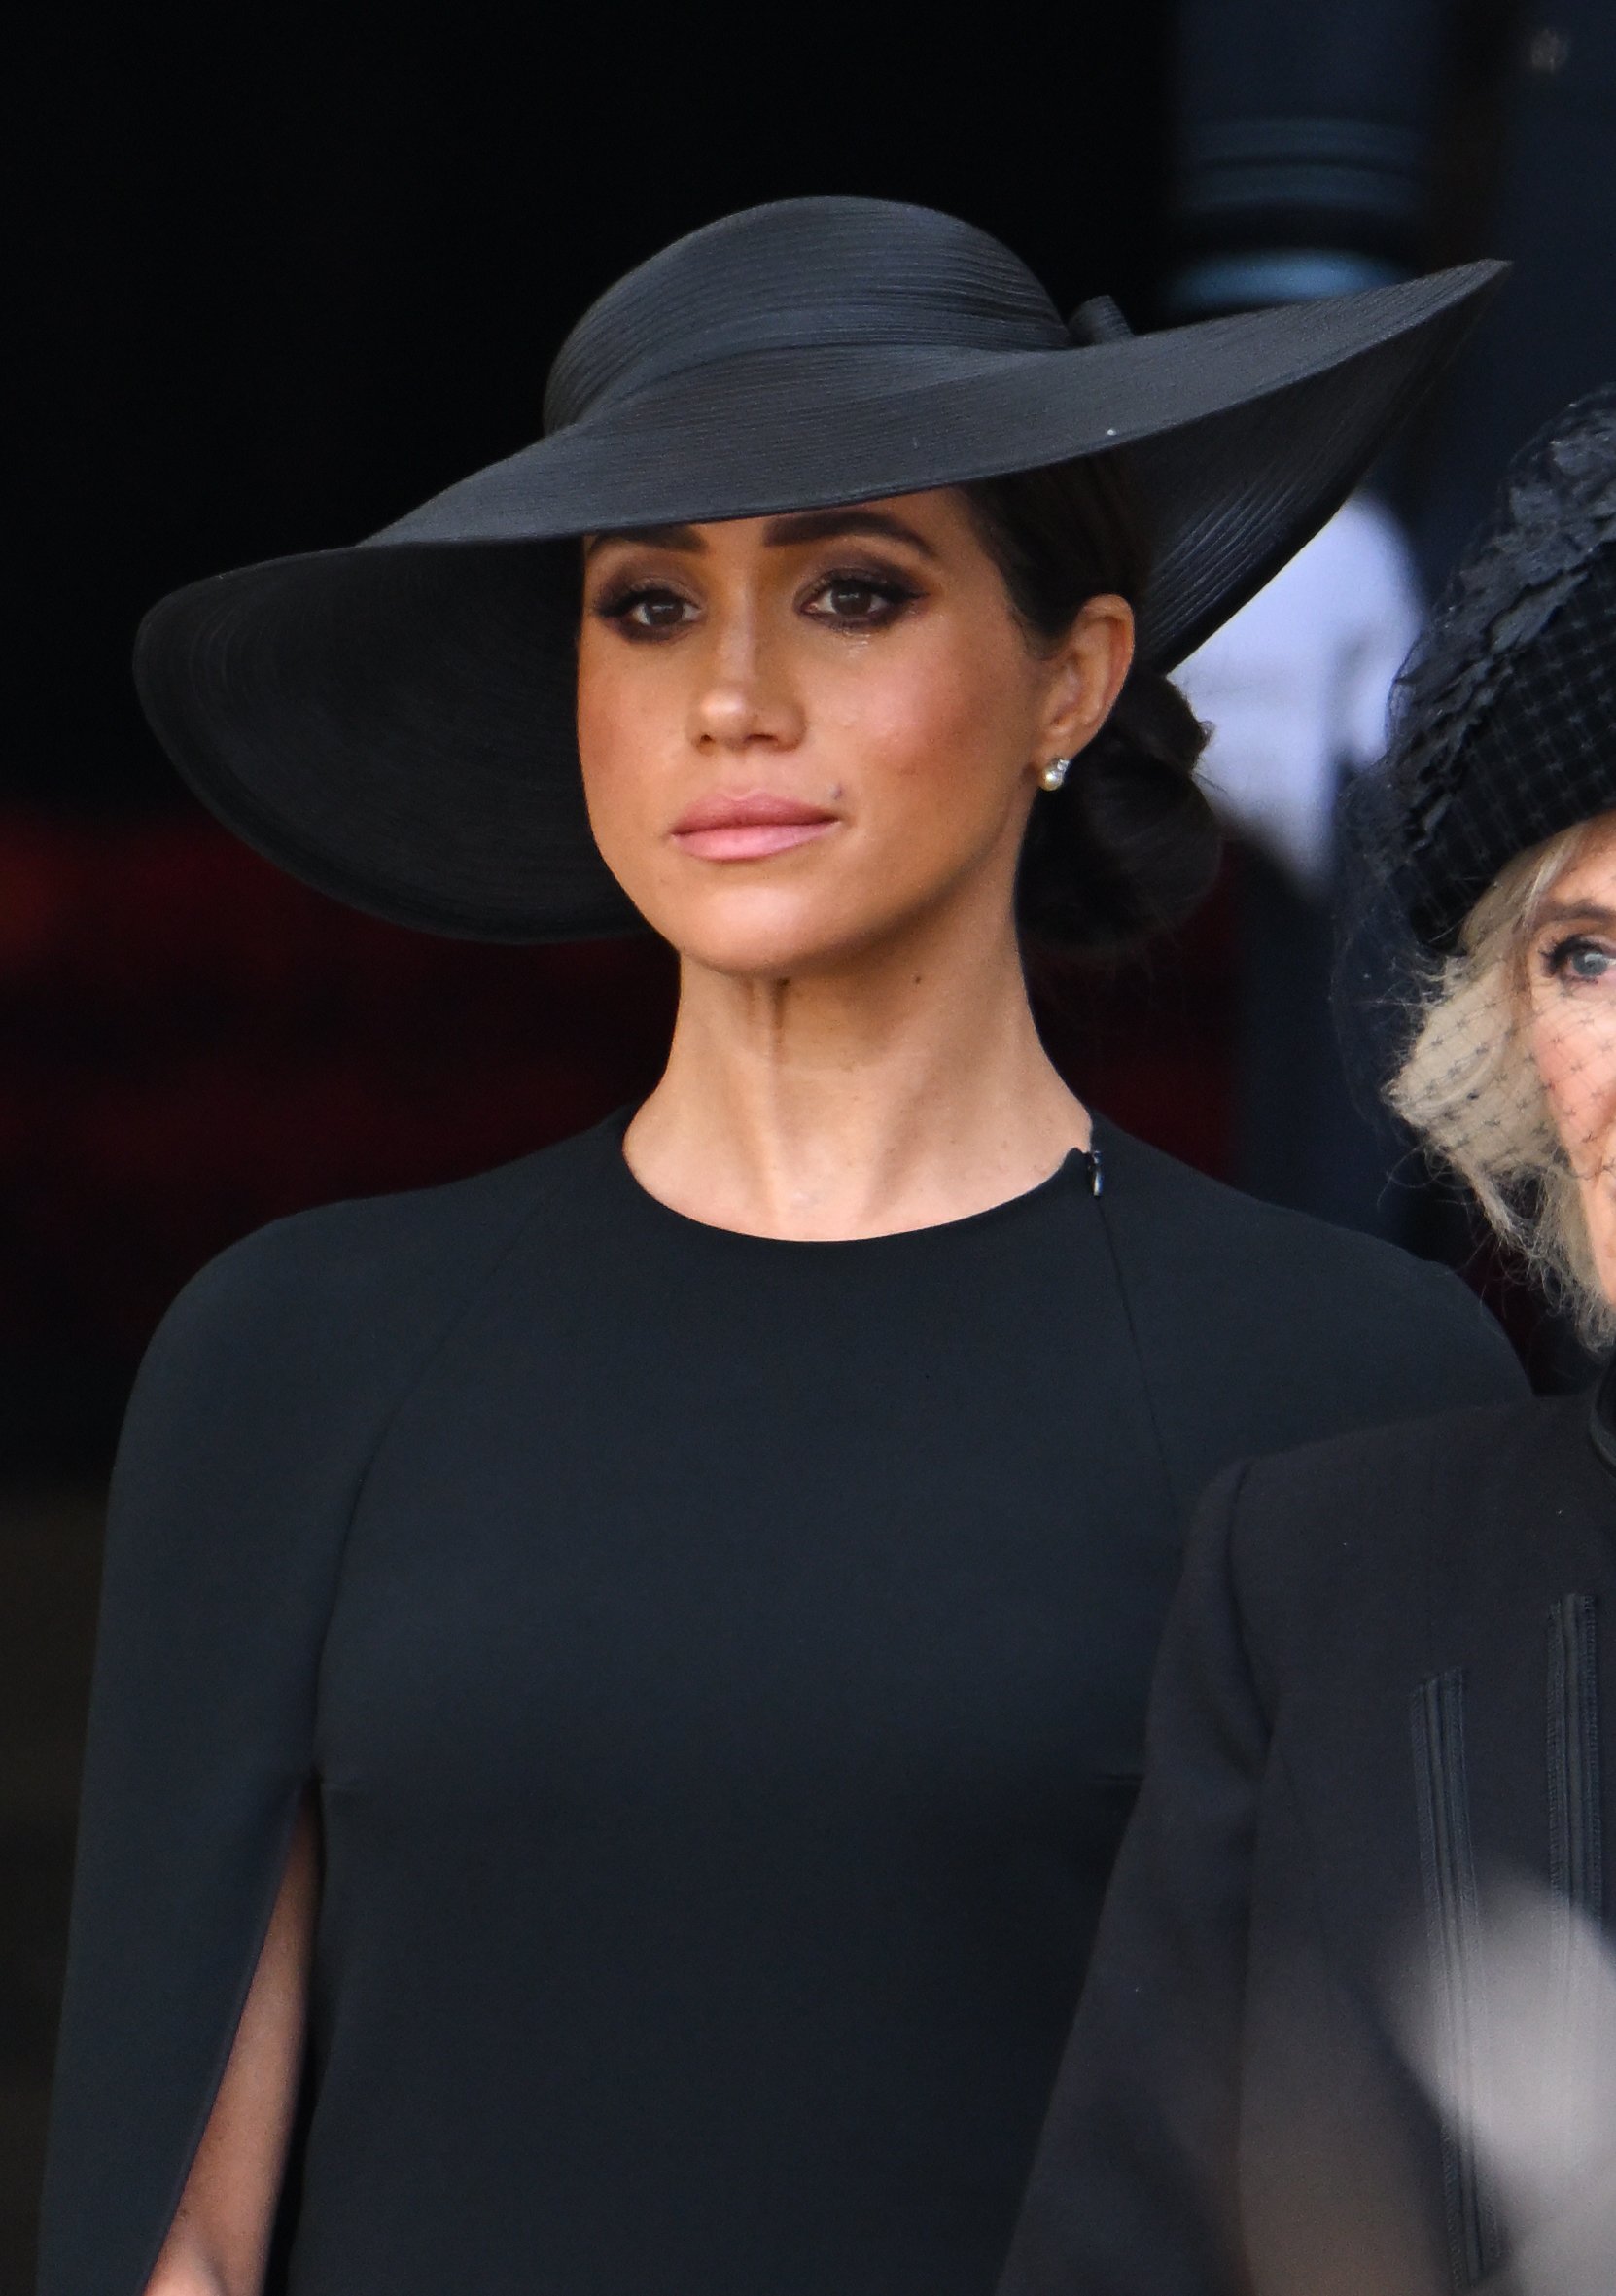 Meghan Markle pictured during the state funeral of Queen Elizabeth II at Westminster Abbey on September 19, 2022 in London, England | Source: Getty Images